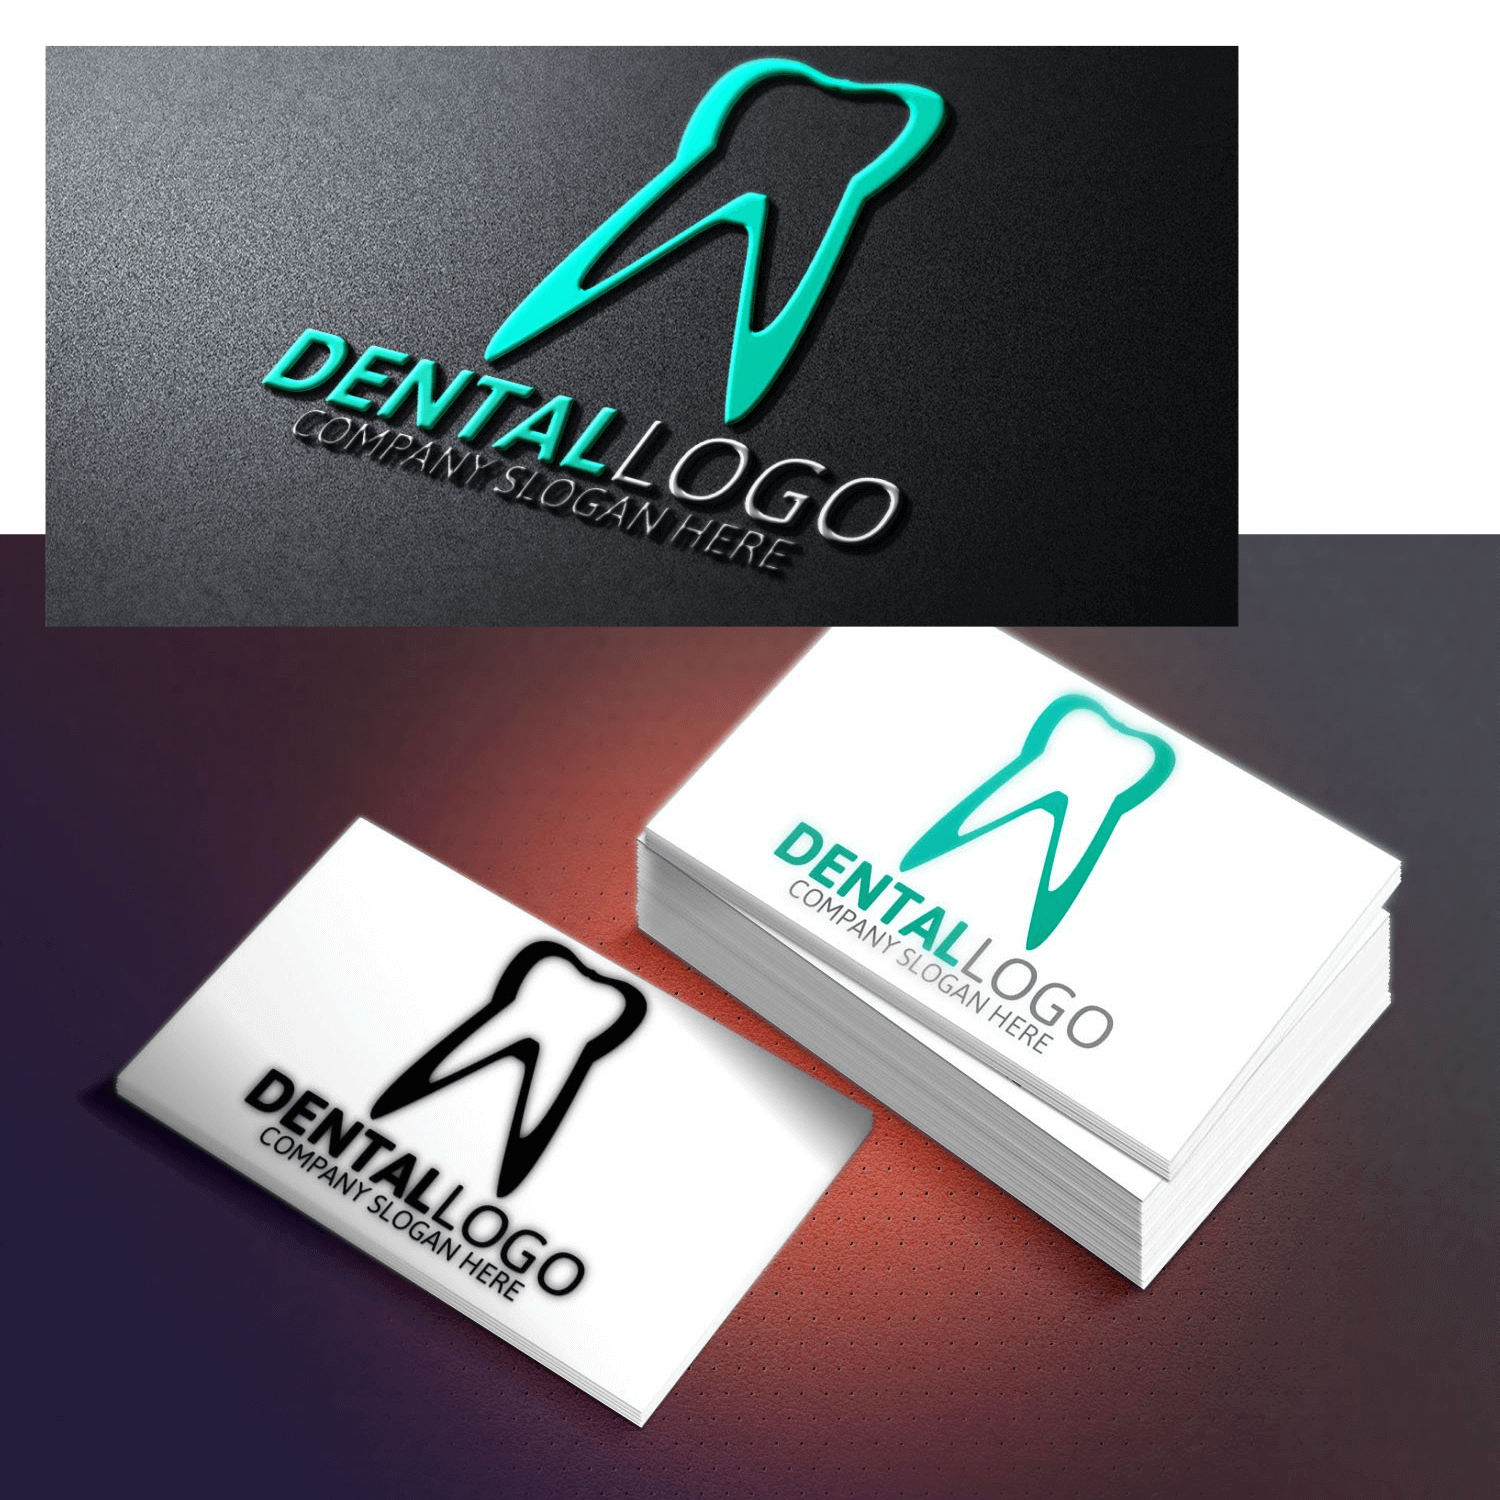 Cards Dentallogo with Imagine Tooth.